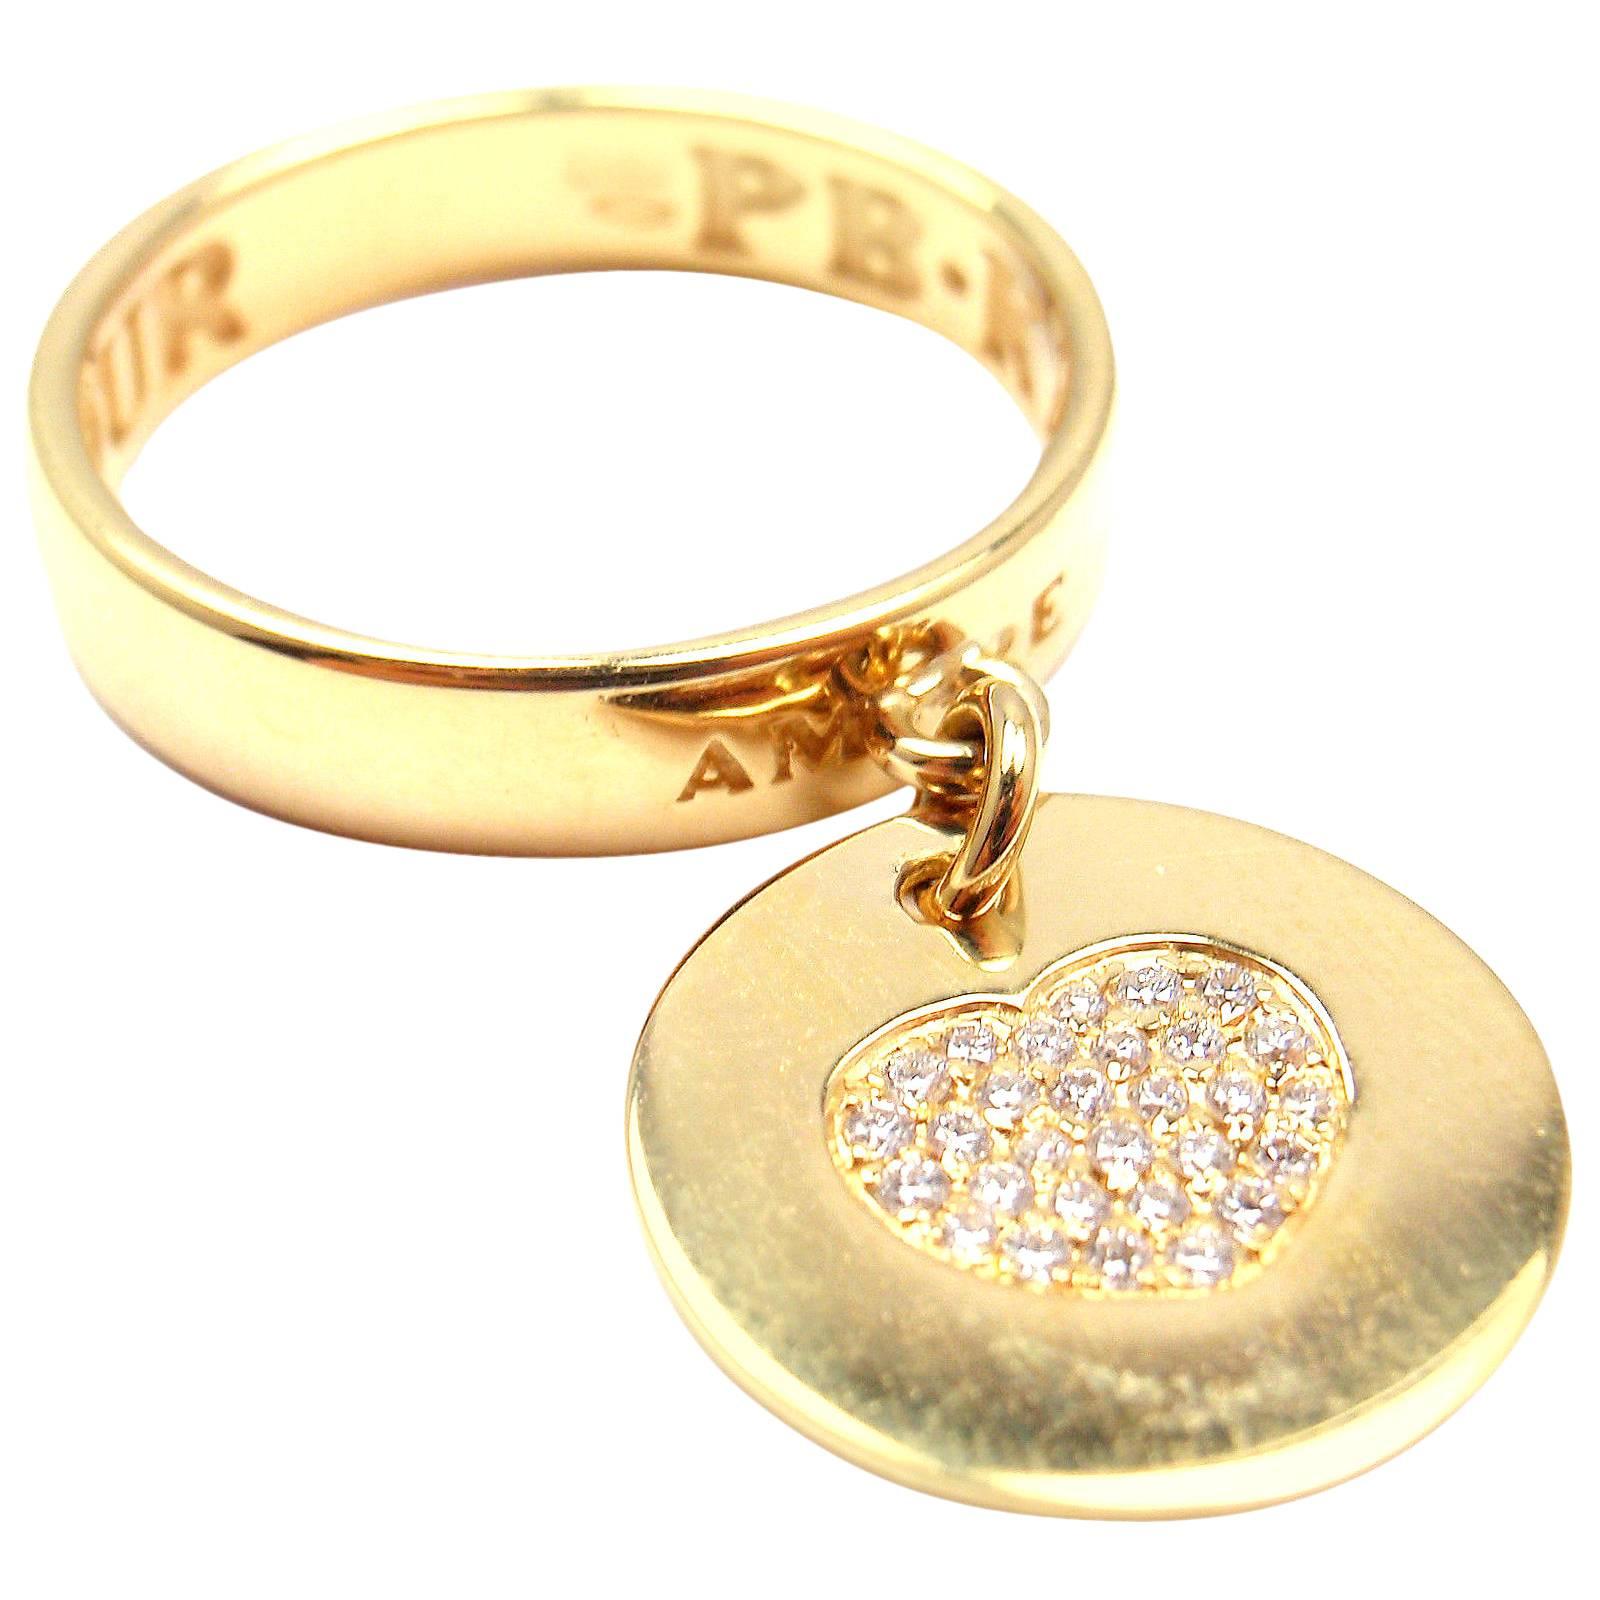 Pasquale Bruni AMORE Diamond Gold Cocktail Ring